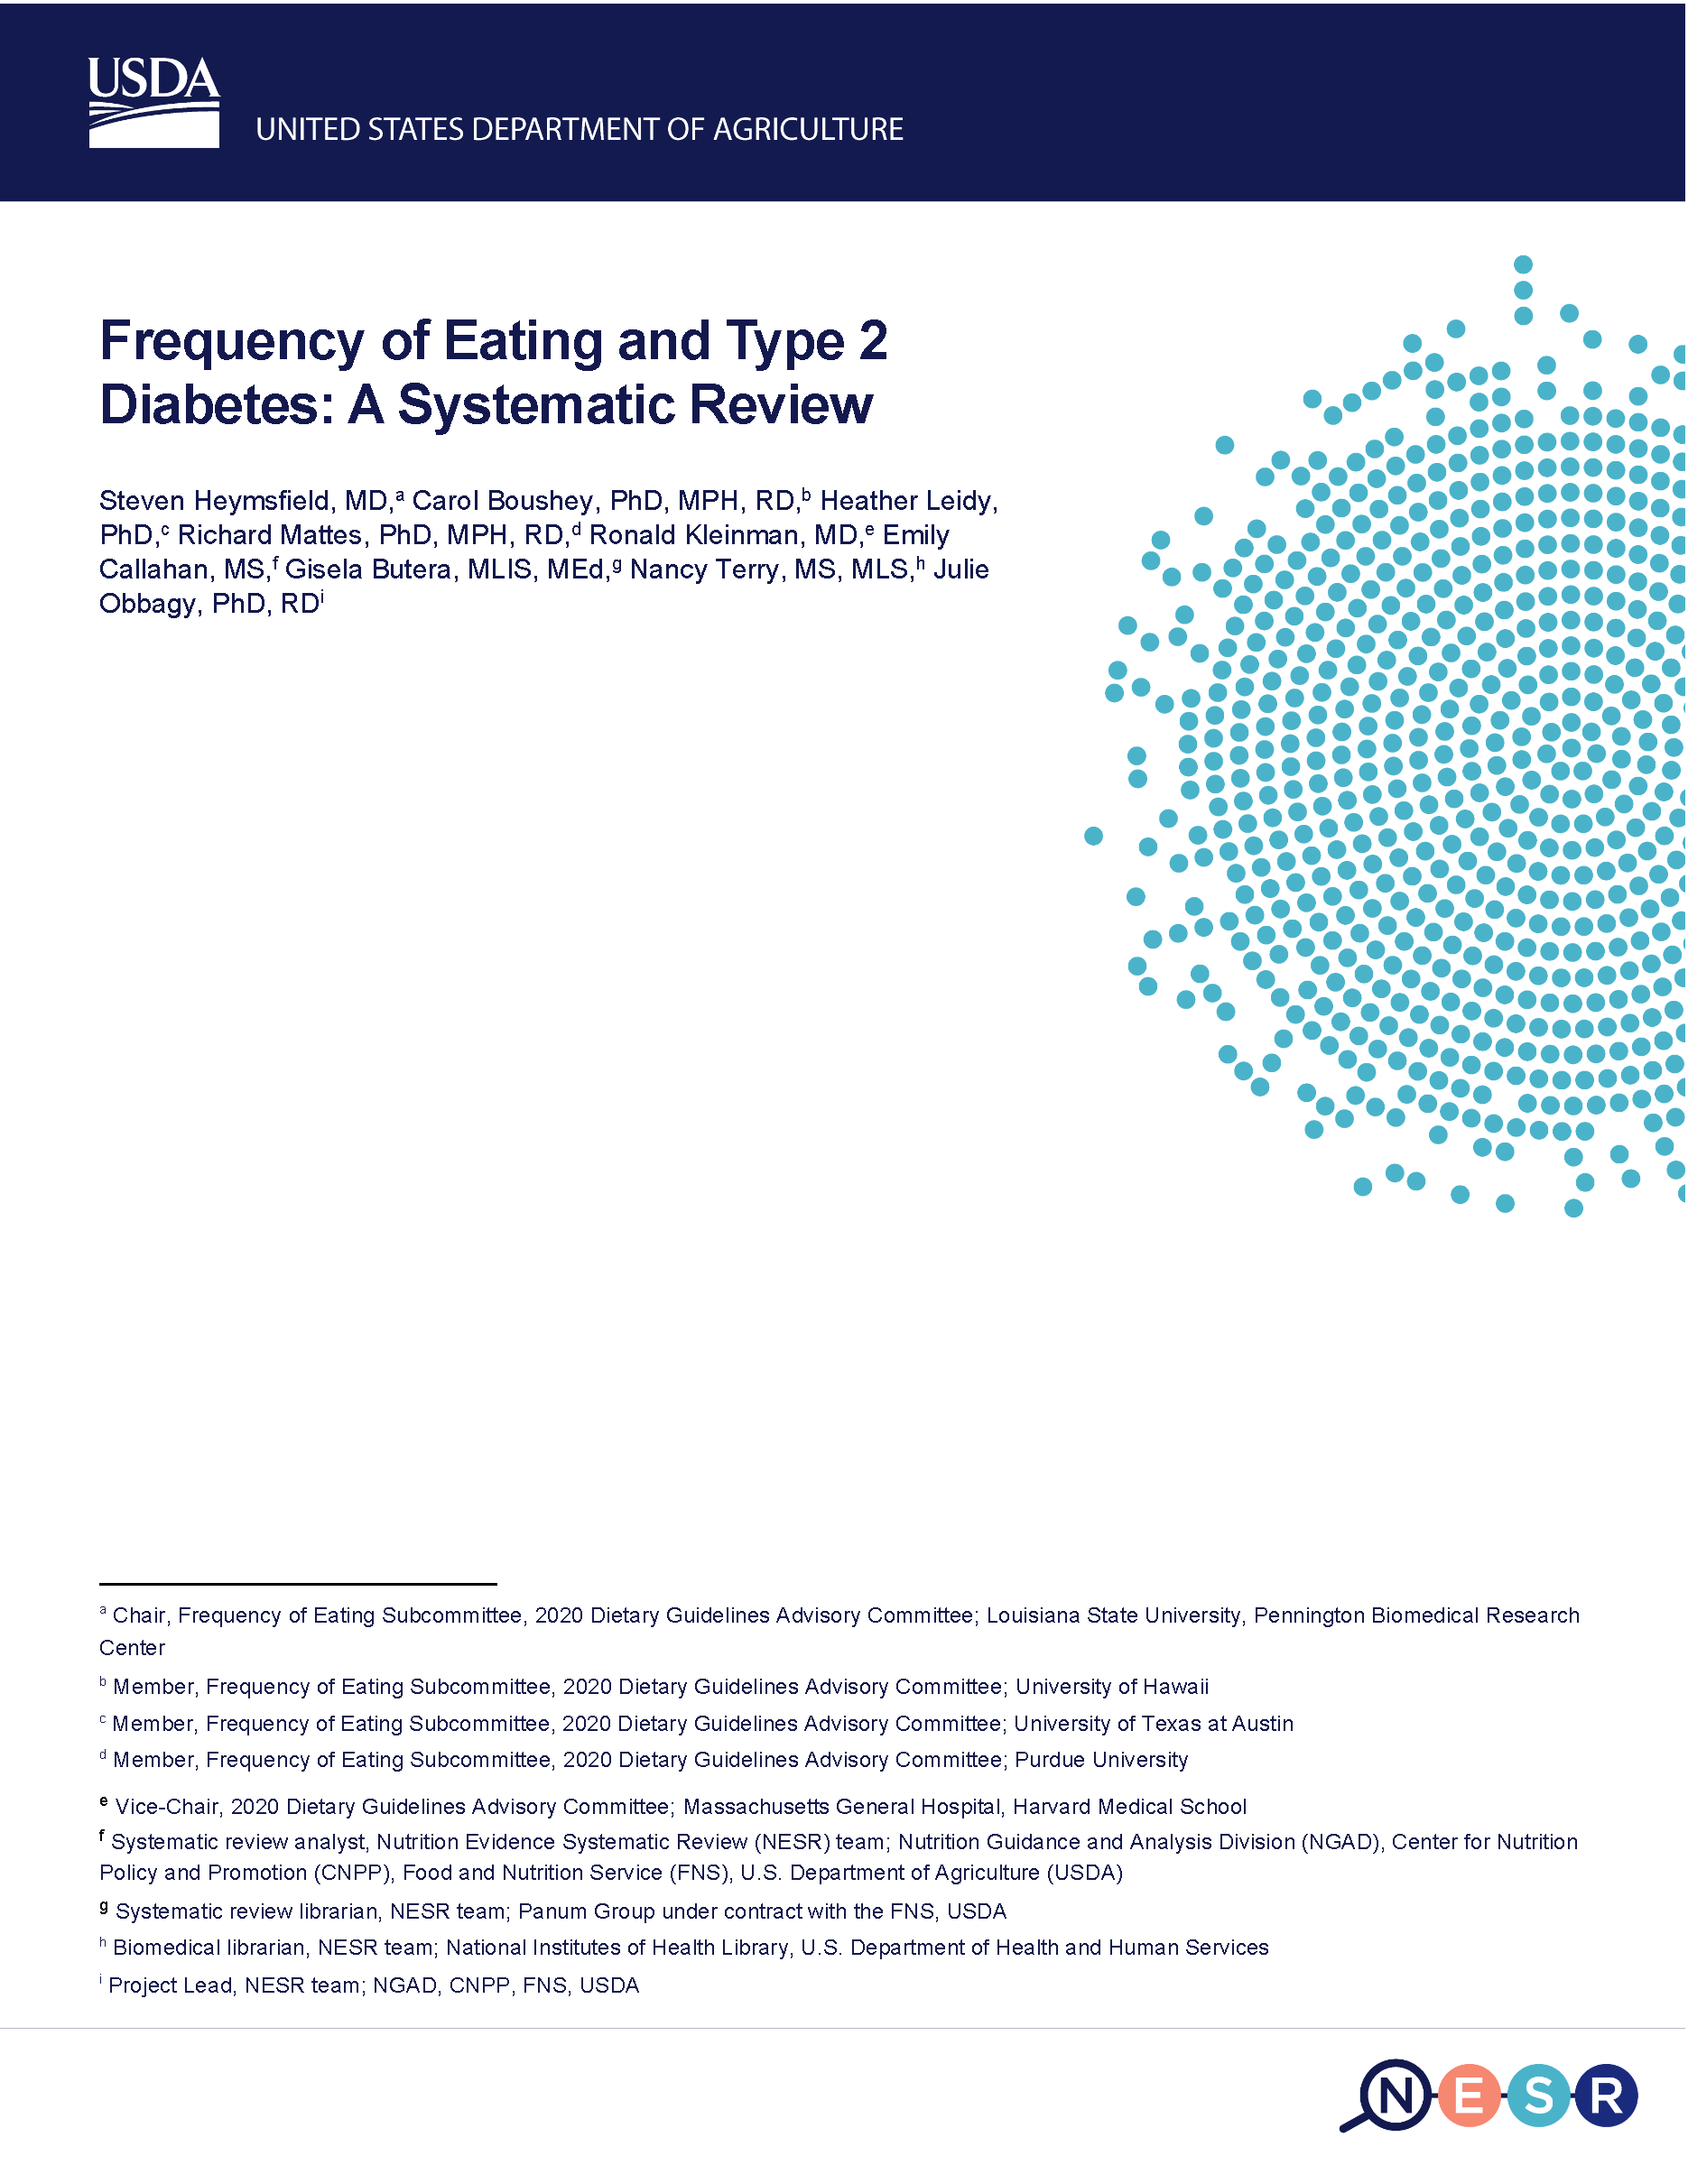 Cover of frequency of eating and type 2 diabetes report